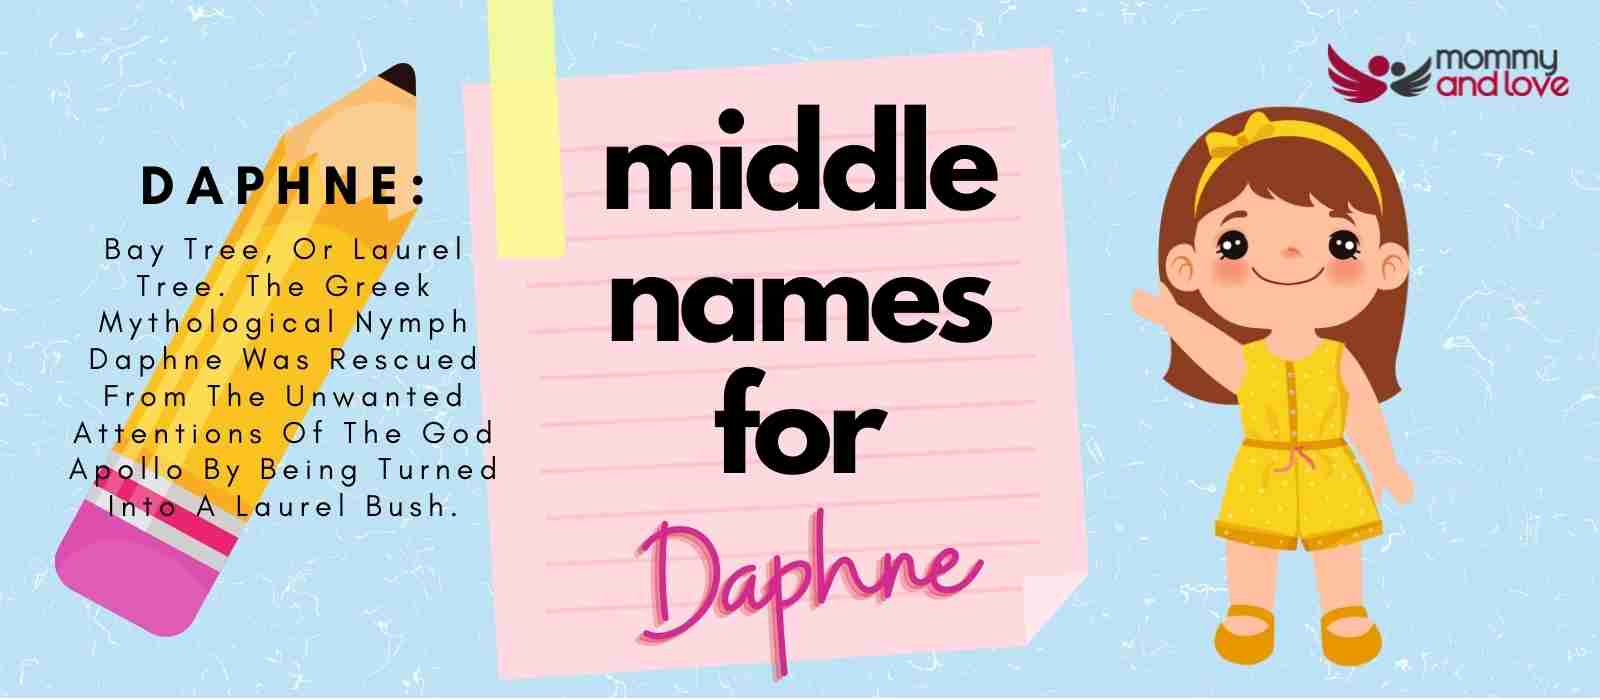 Middle Names for Daphne